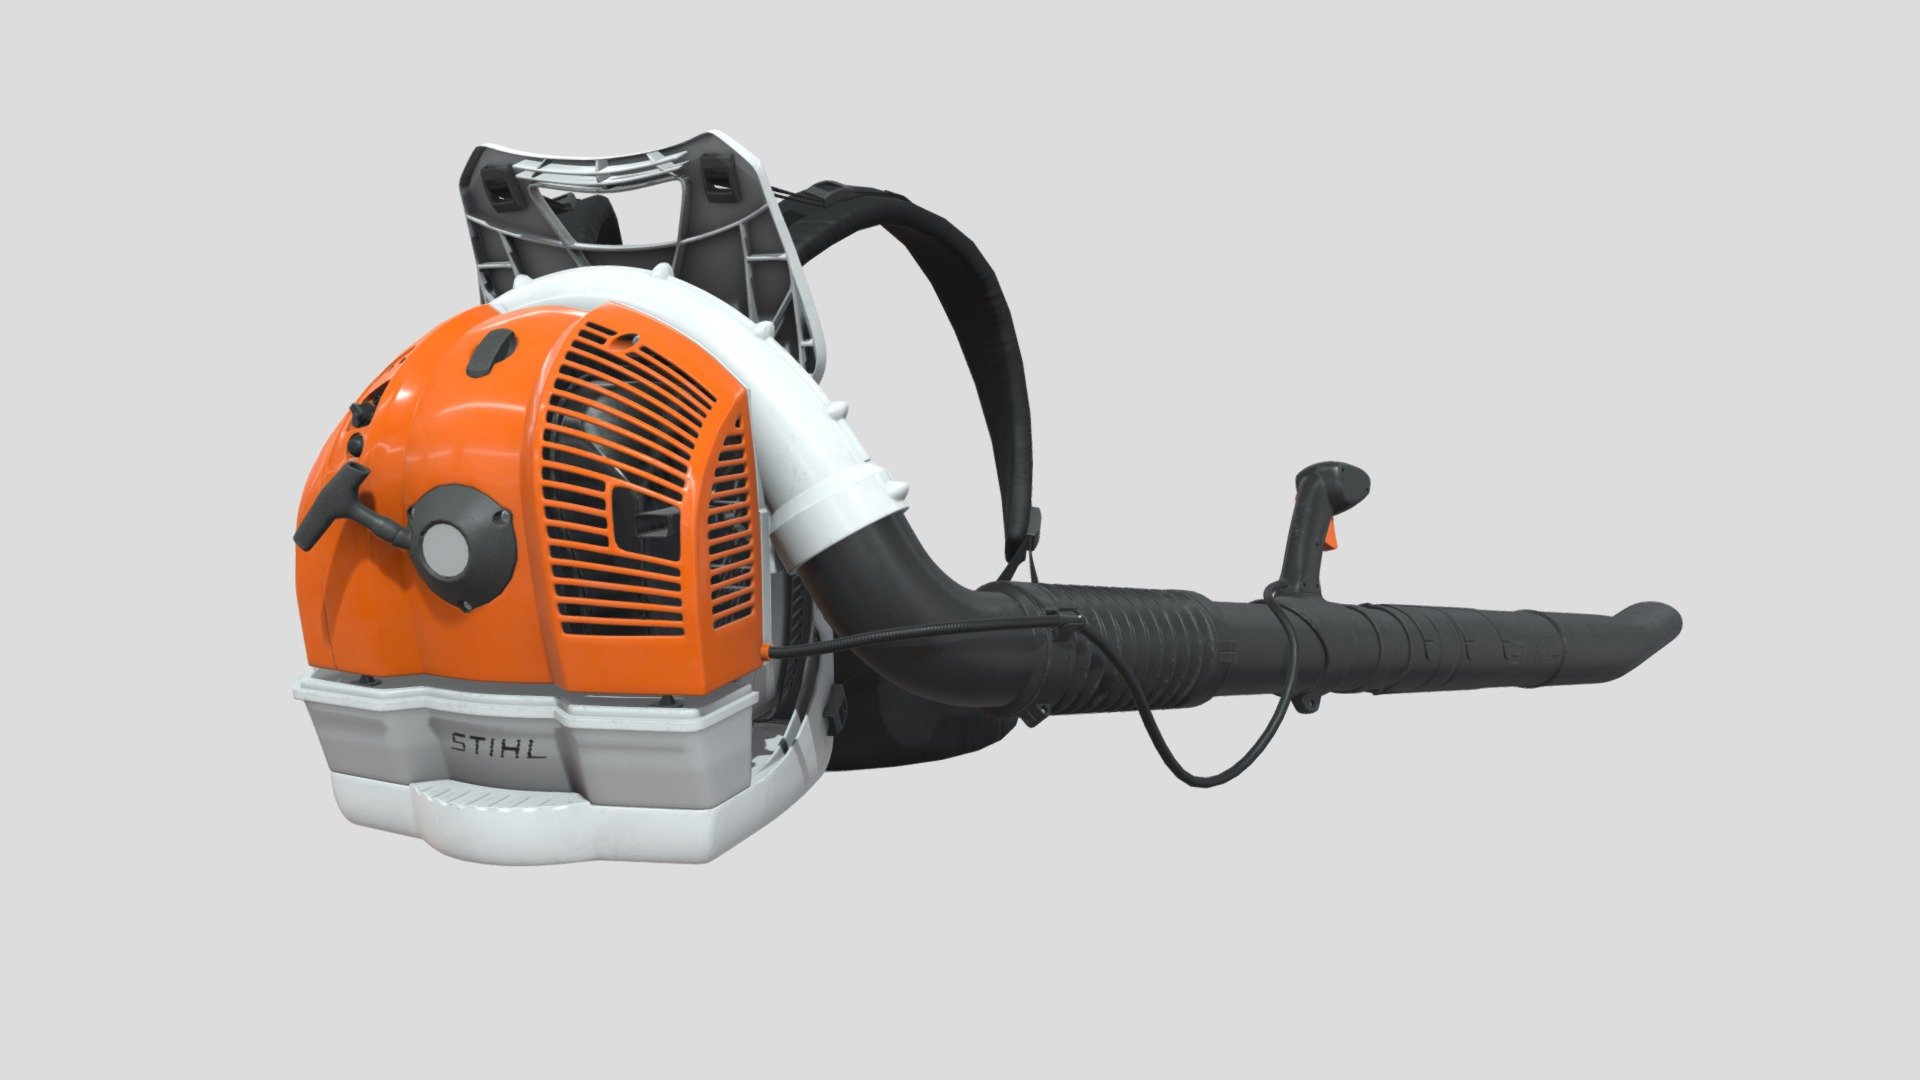 Realistic model of a popular Stihl backpack blower. It took me around 2 weeks to make, textures were created in Substance Painter 3d model